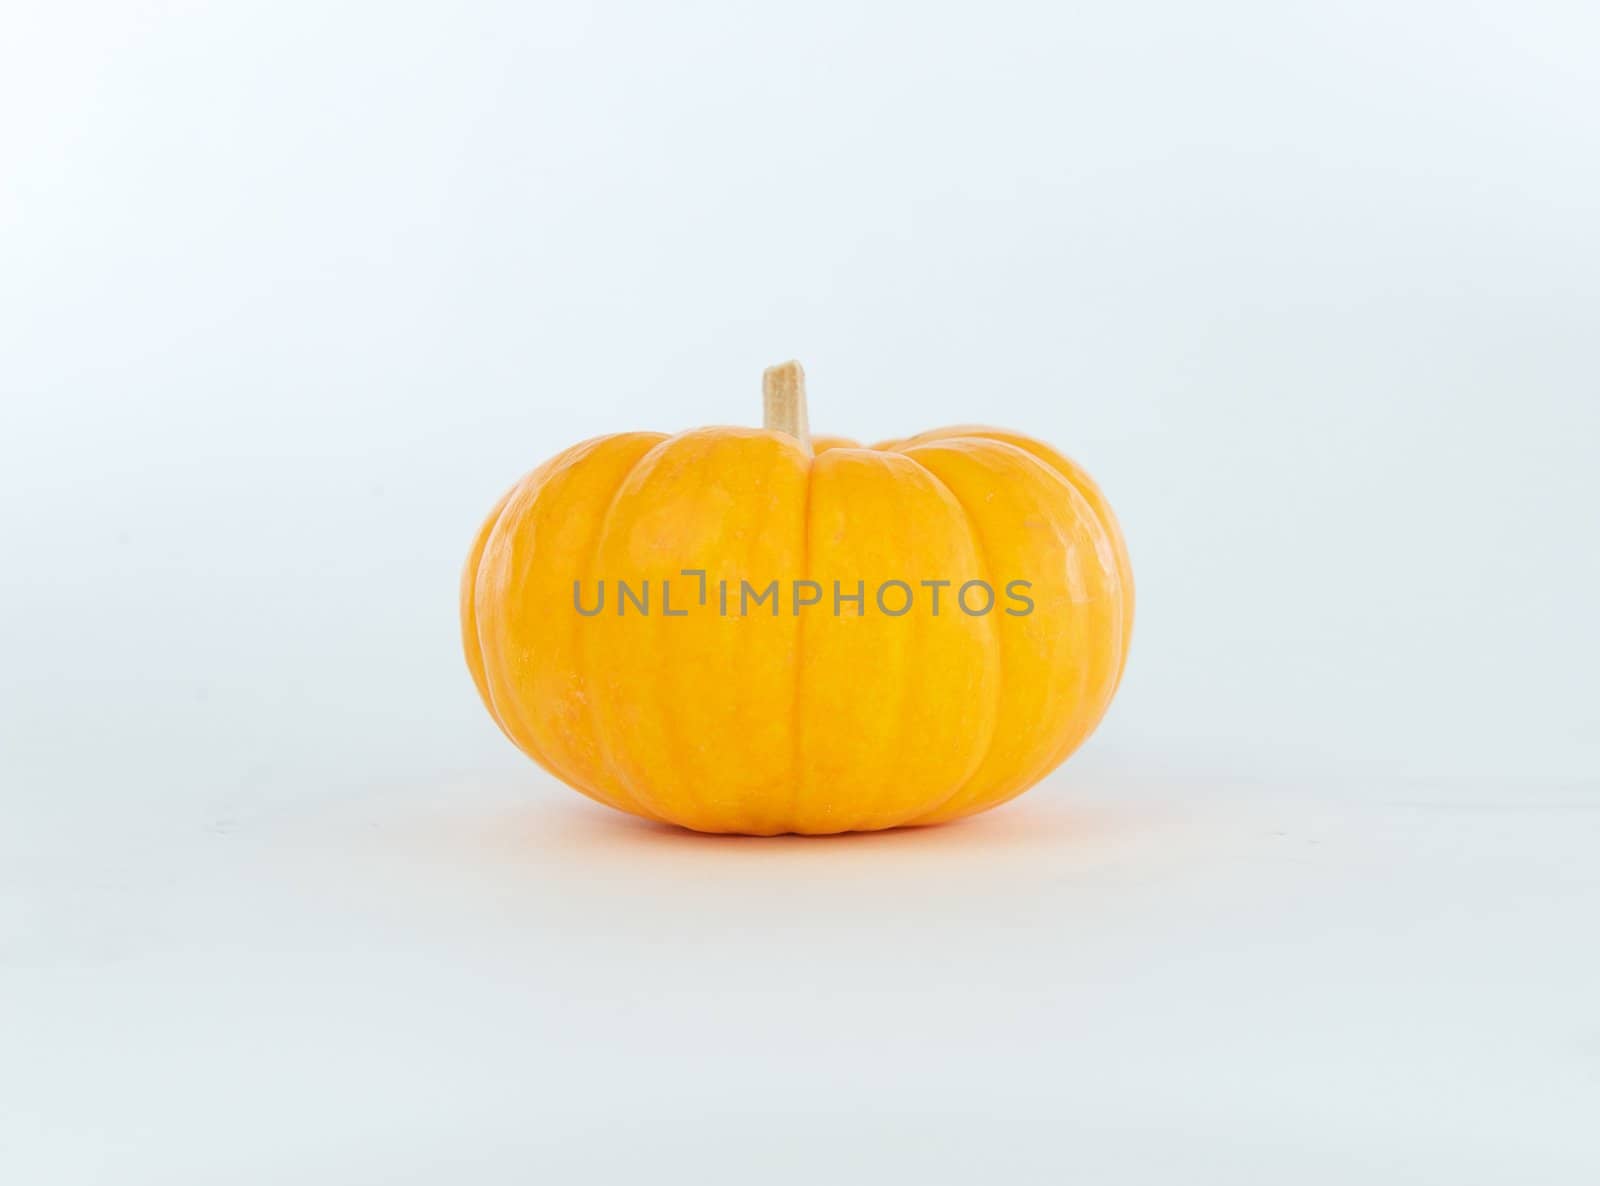 Small ornamental pumpkin with a light colored stem isolated on a white background